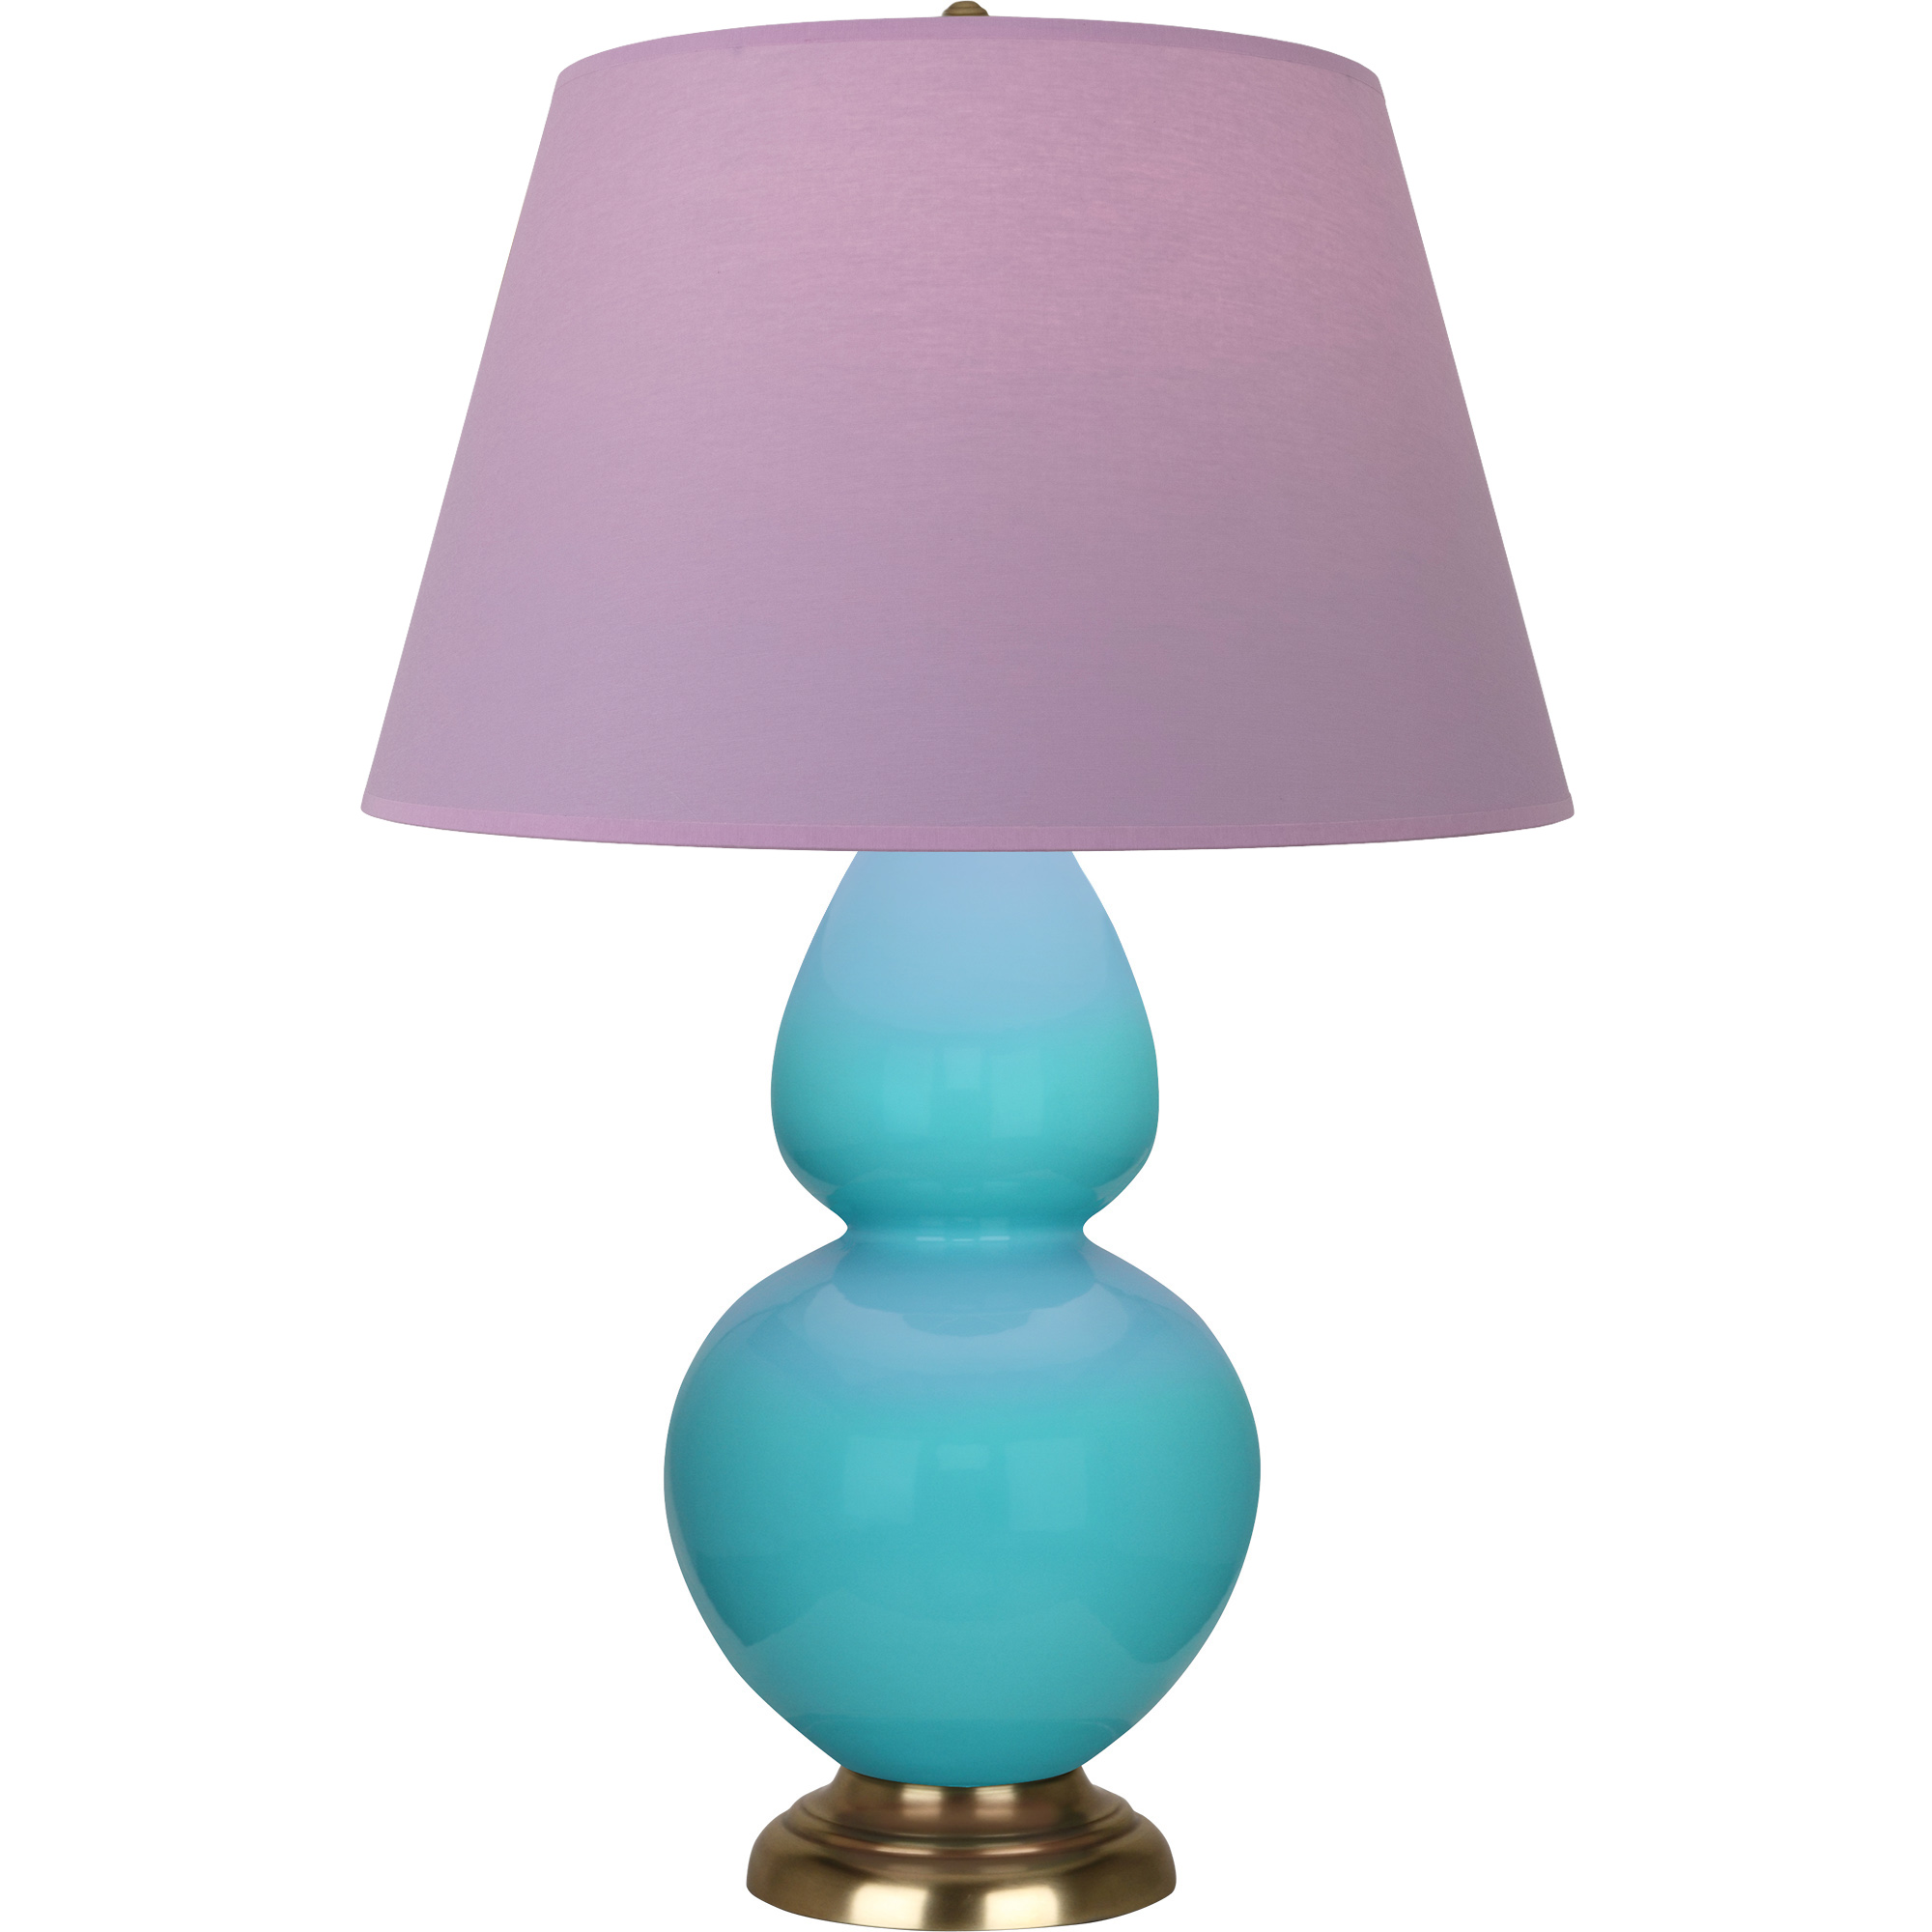 Double Gourd Table Lamp Style #1740L